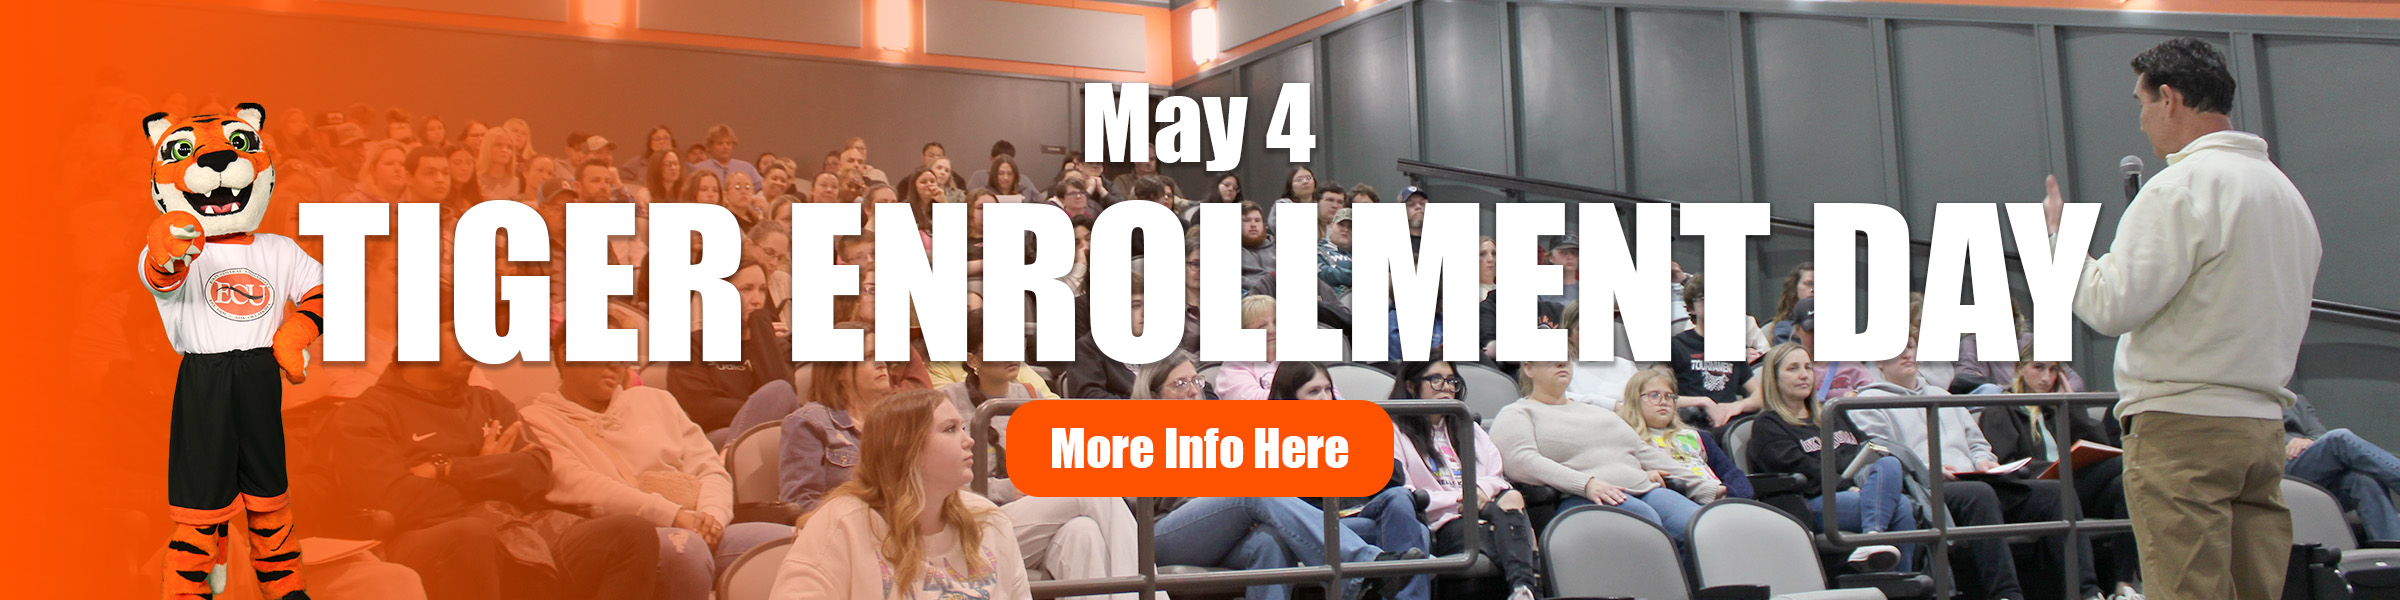 May 4, Tiger Enrollment Day, More Info Here